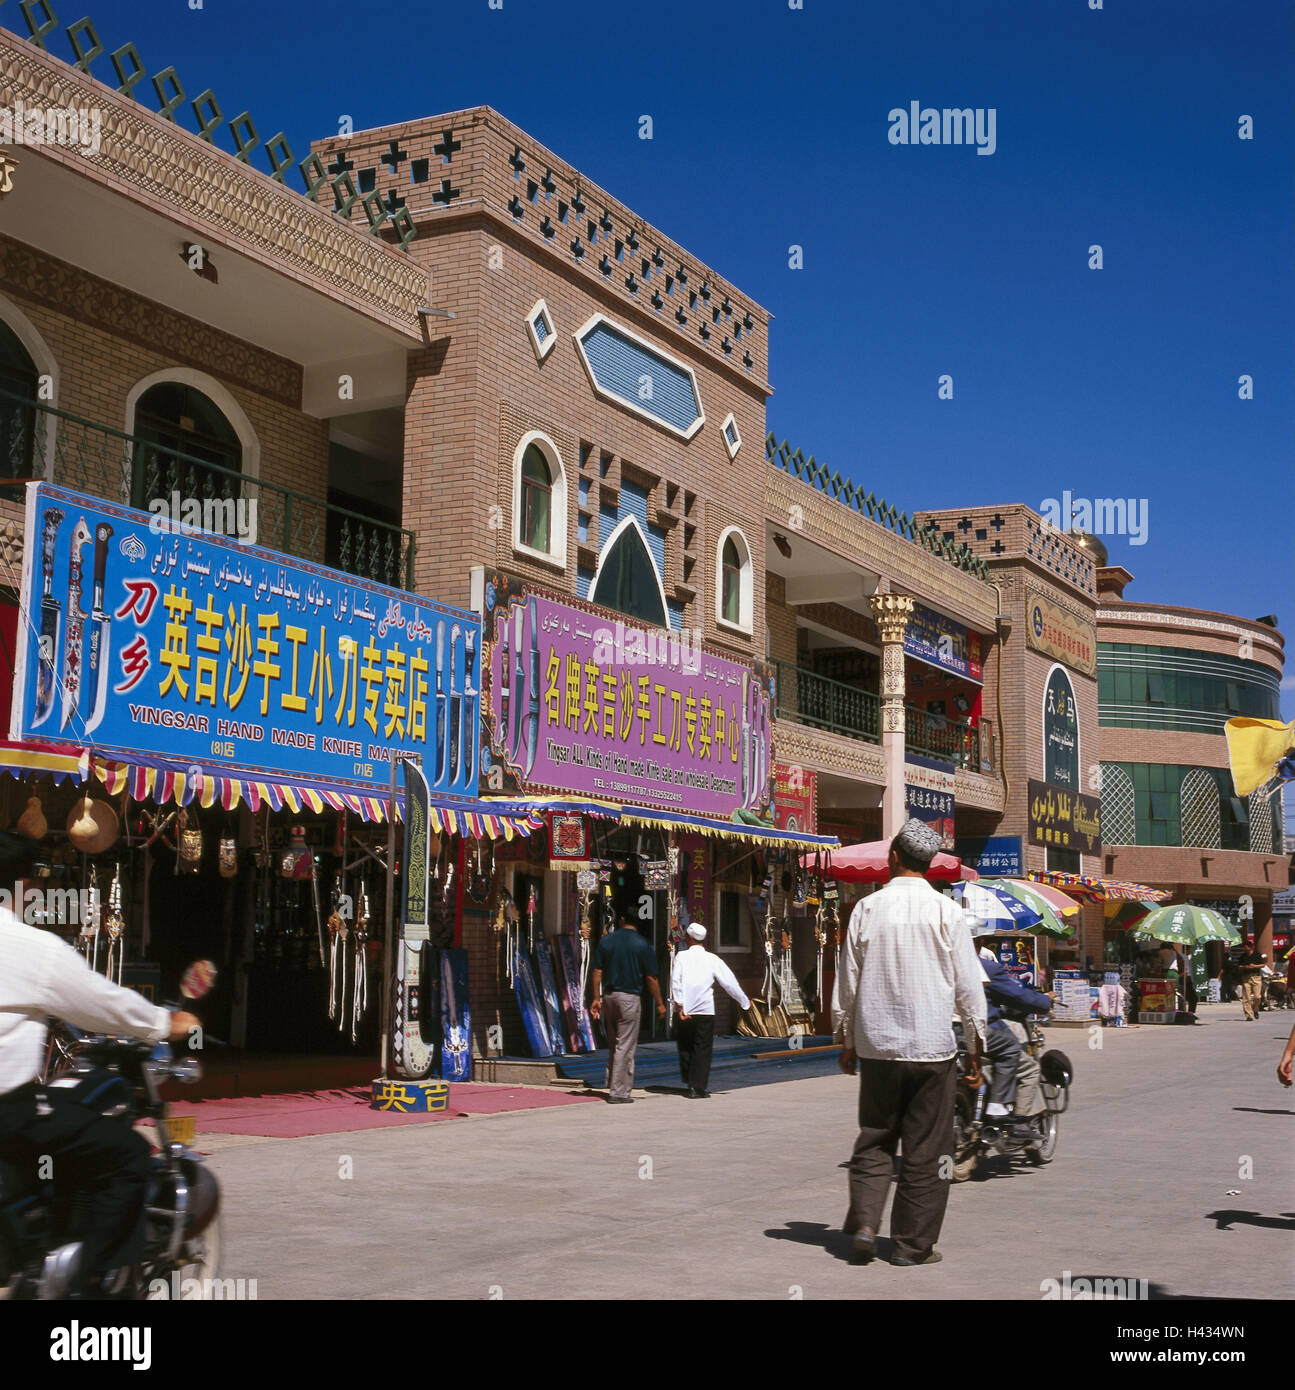 China, region Sinkiang, Framing-even, Id Kah Mosque Square, souvenir shops, passers-by, Asia, Silk Road, Xinjiang, Kashi, town view, town, city centre, Straßenzene, building, market, bazaar, shops, shops, trade, sales, souvenirs, souvenir sales, person, outside, Stock Photo